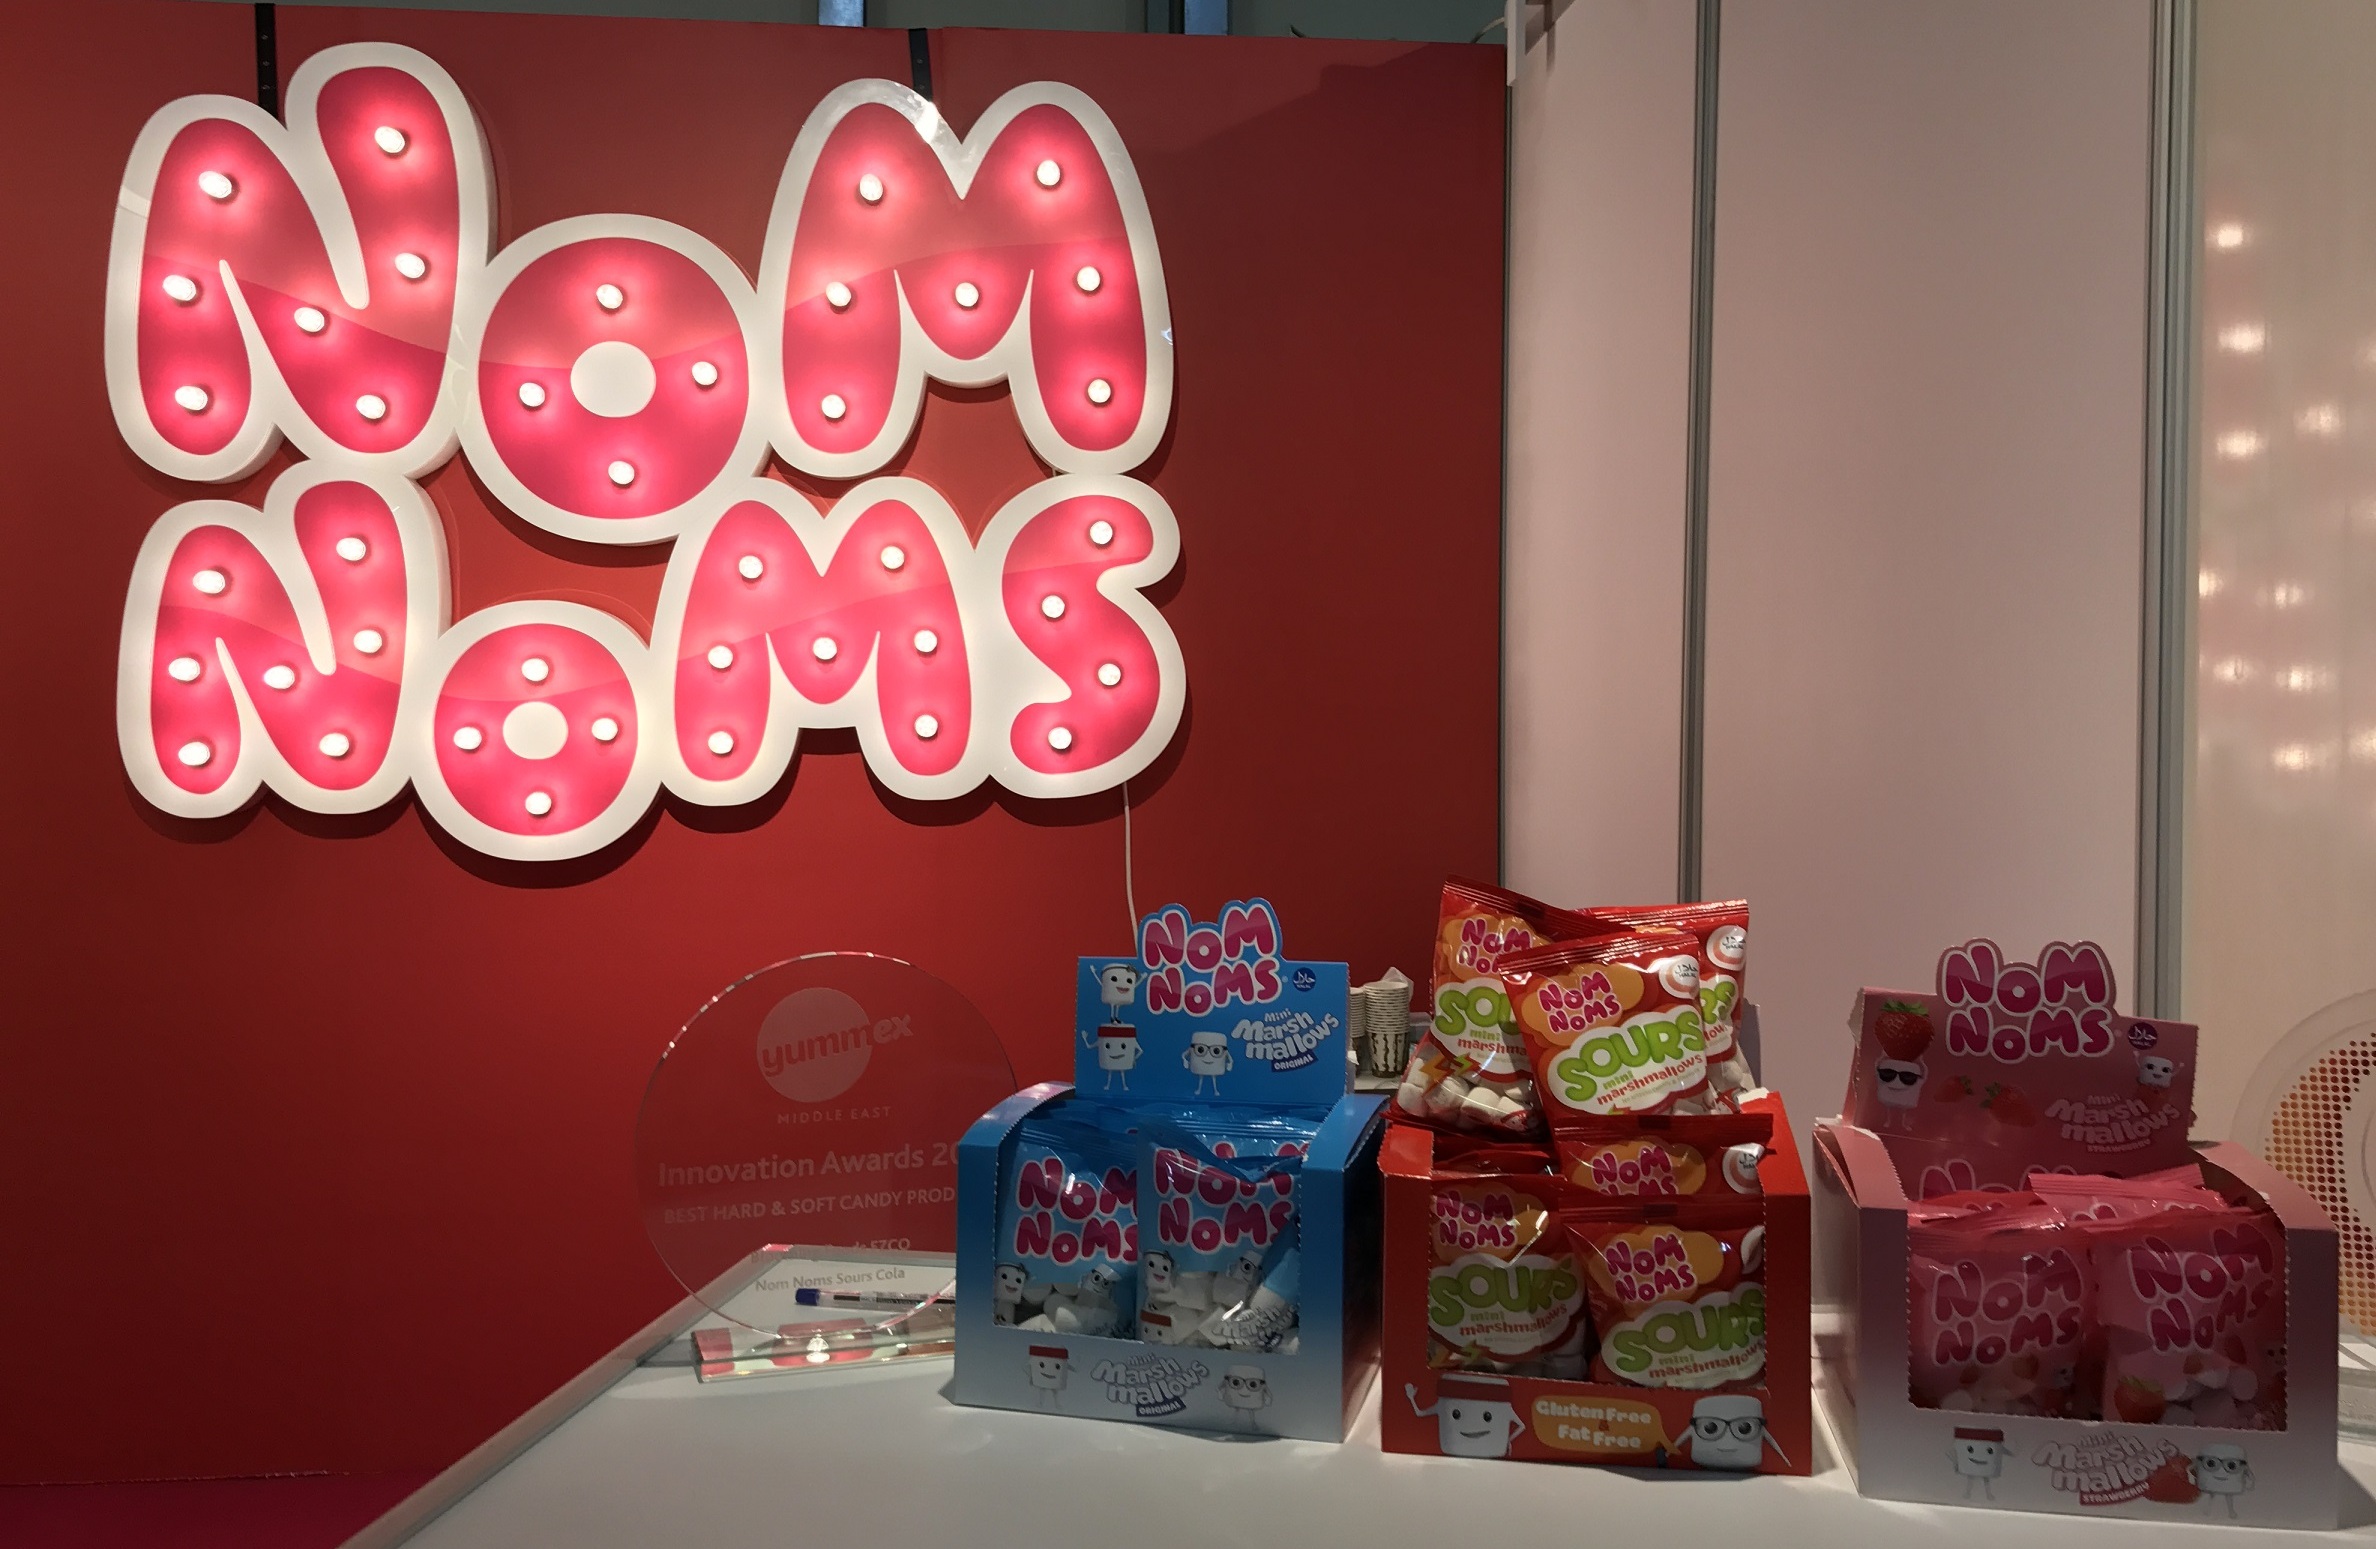 Startup Nom Noms overcomes sours challenge in soft candy